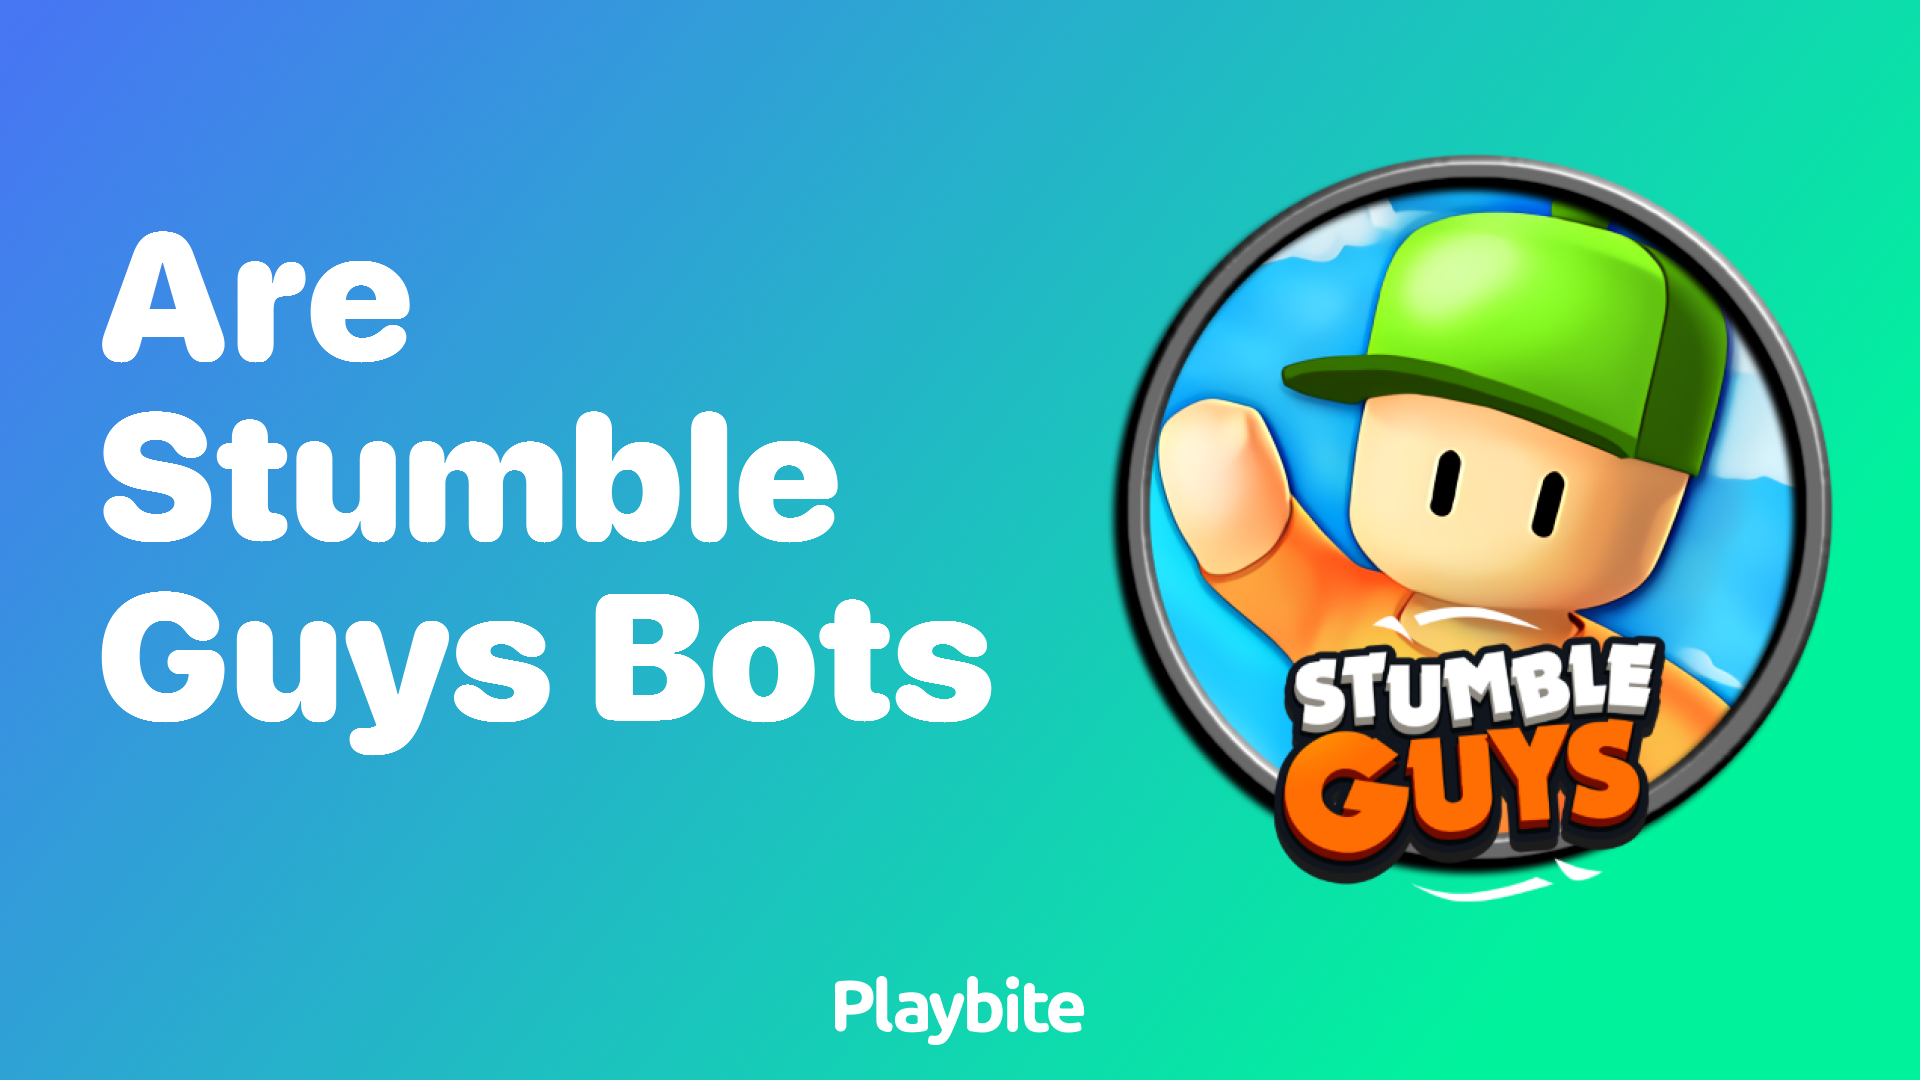 Are Stumble Guys Bots? Let&#8217;s Find Out!